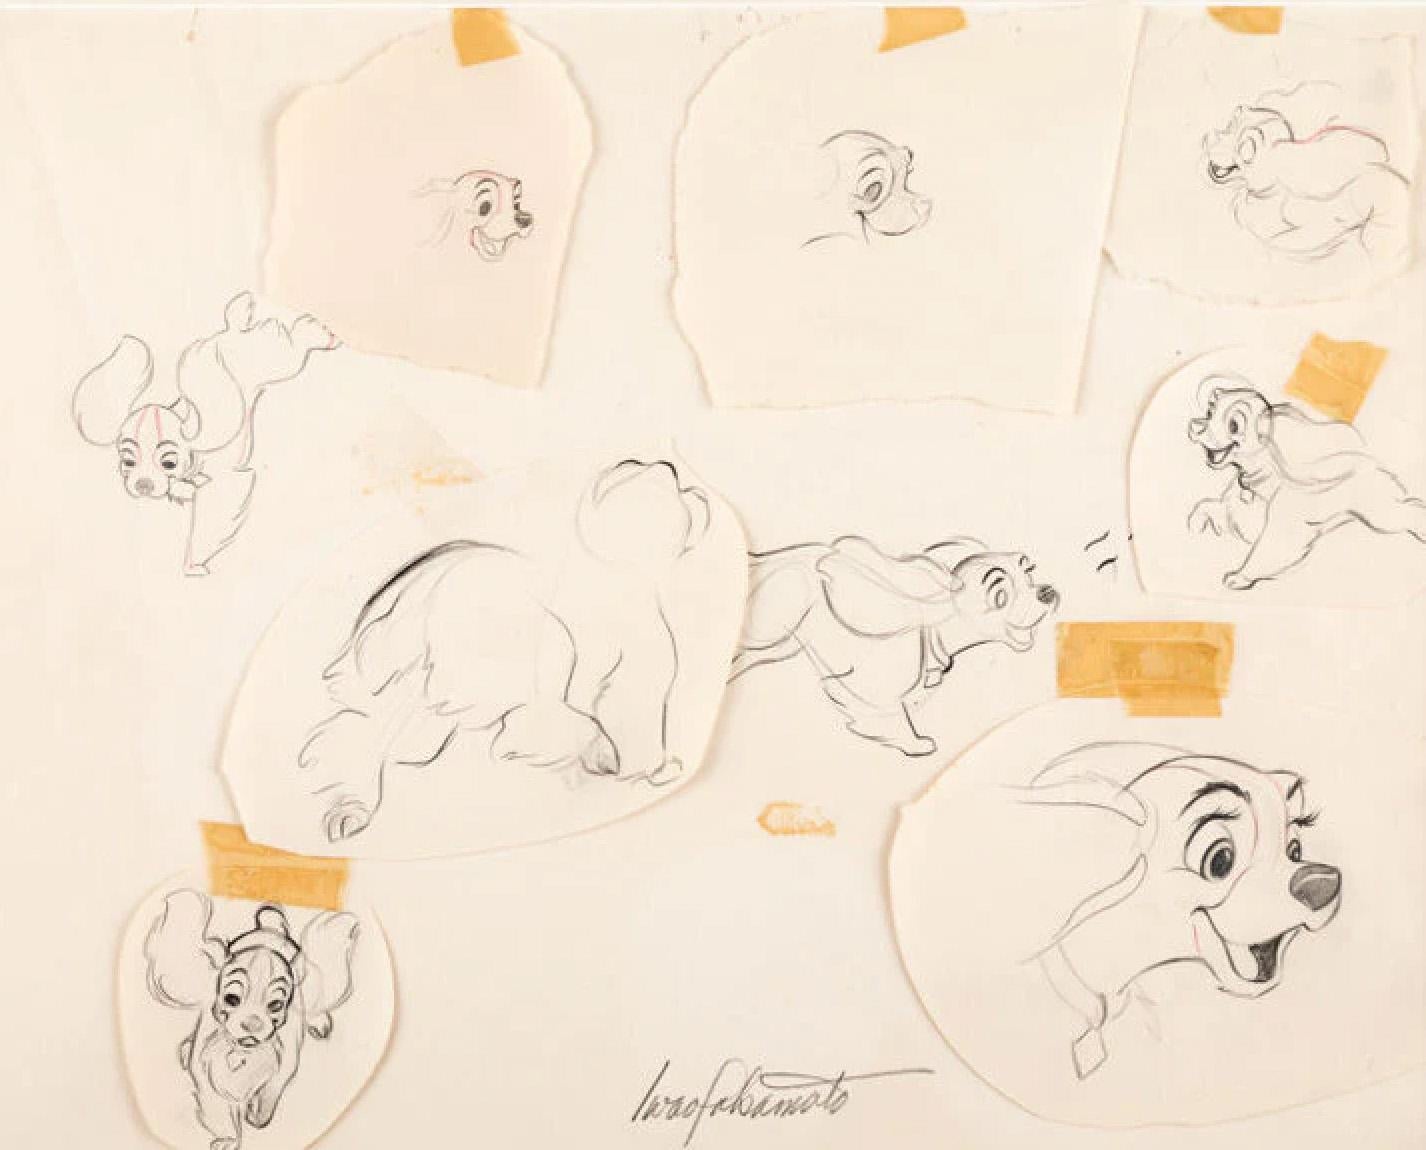 Lady and the Tramp Model Sheet Drawing Signed by Iwao Takamoto